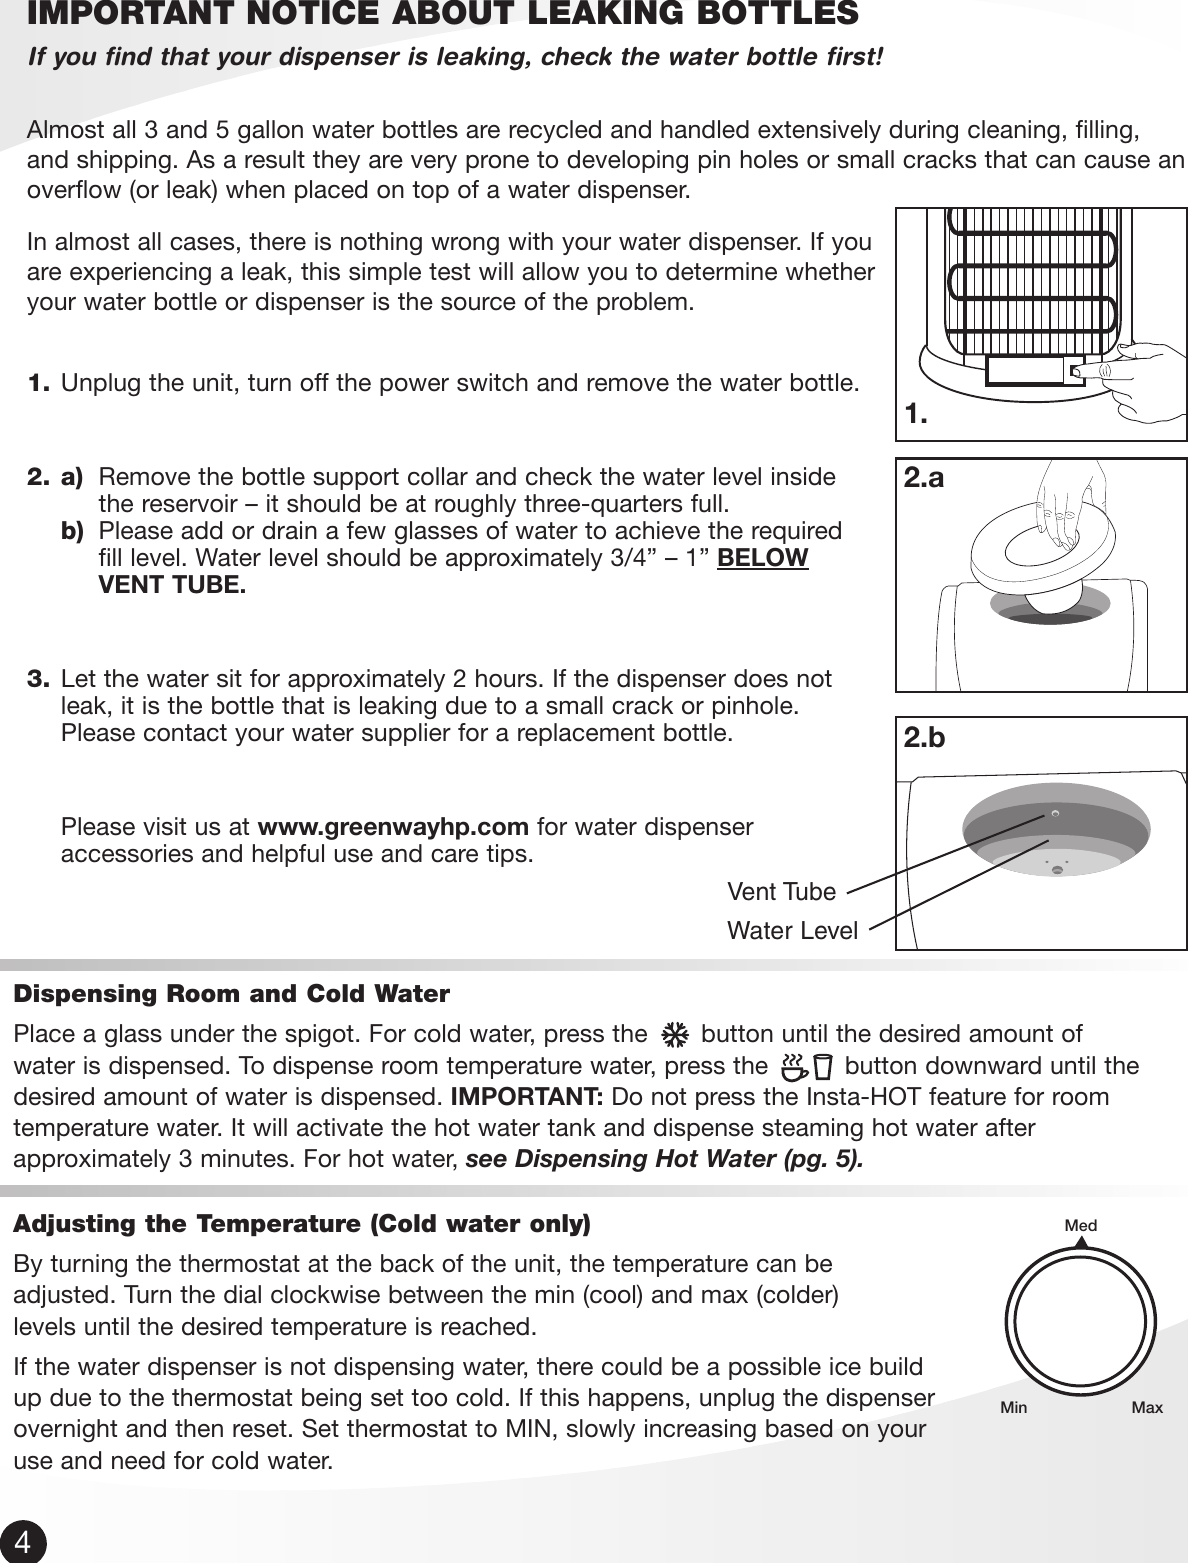 Page 5 of 10 - Vitapur Vitapur-Water-Dispenser-Use-And-Care-Manual- ManualsLib - Makes It Easy To Find Manuals Online!  Vitapur-water-dispenser-use-and-care-manual